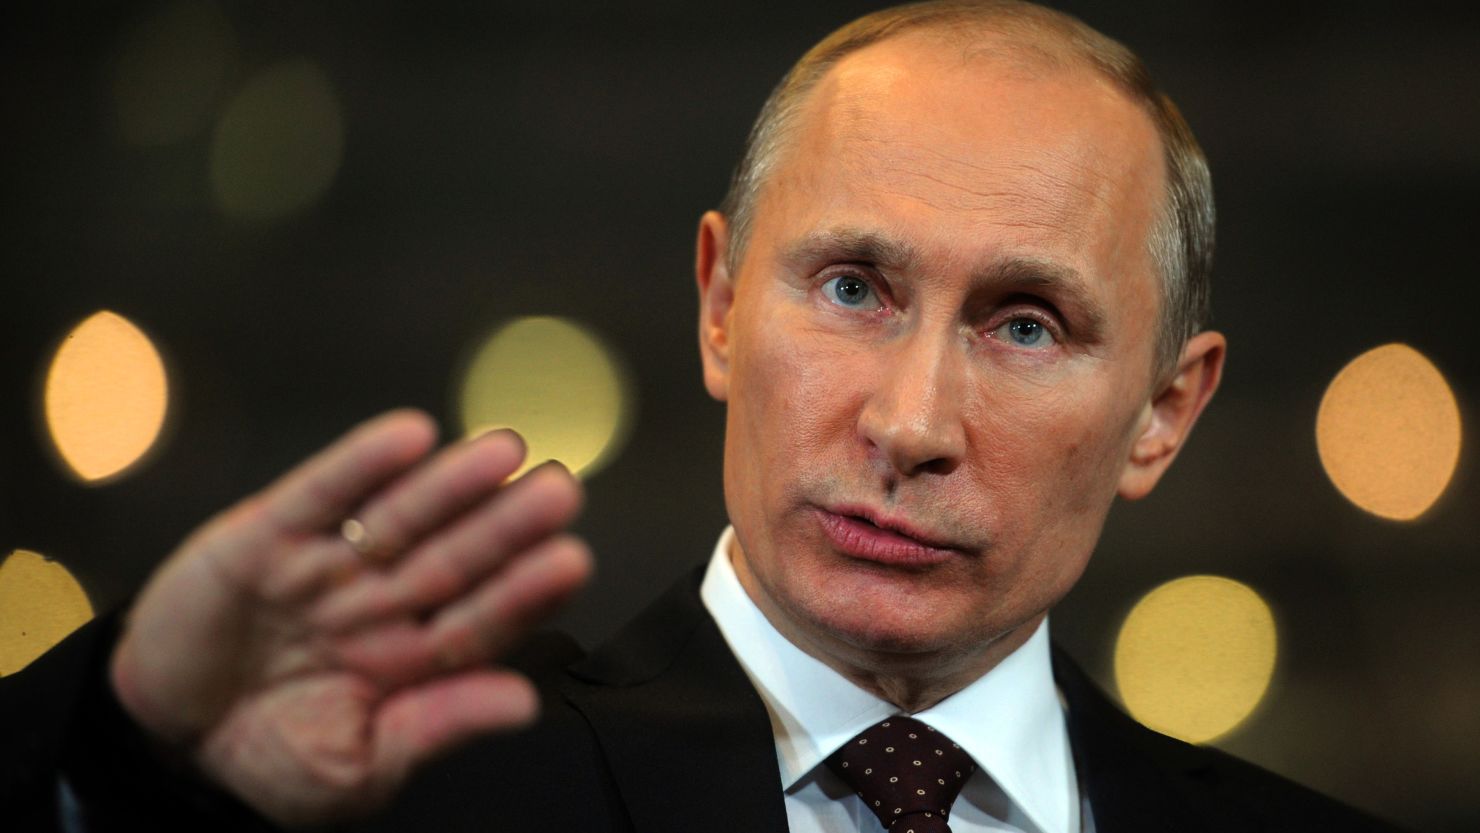 Russian Prime Minister Vladimir Putin has said the consequences of a military strike against Iran would be disastrous.